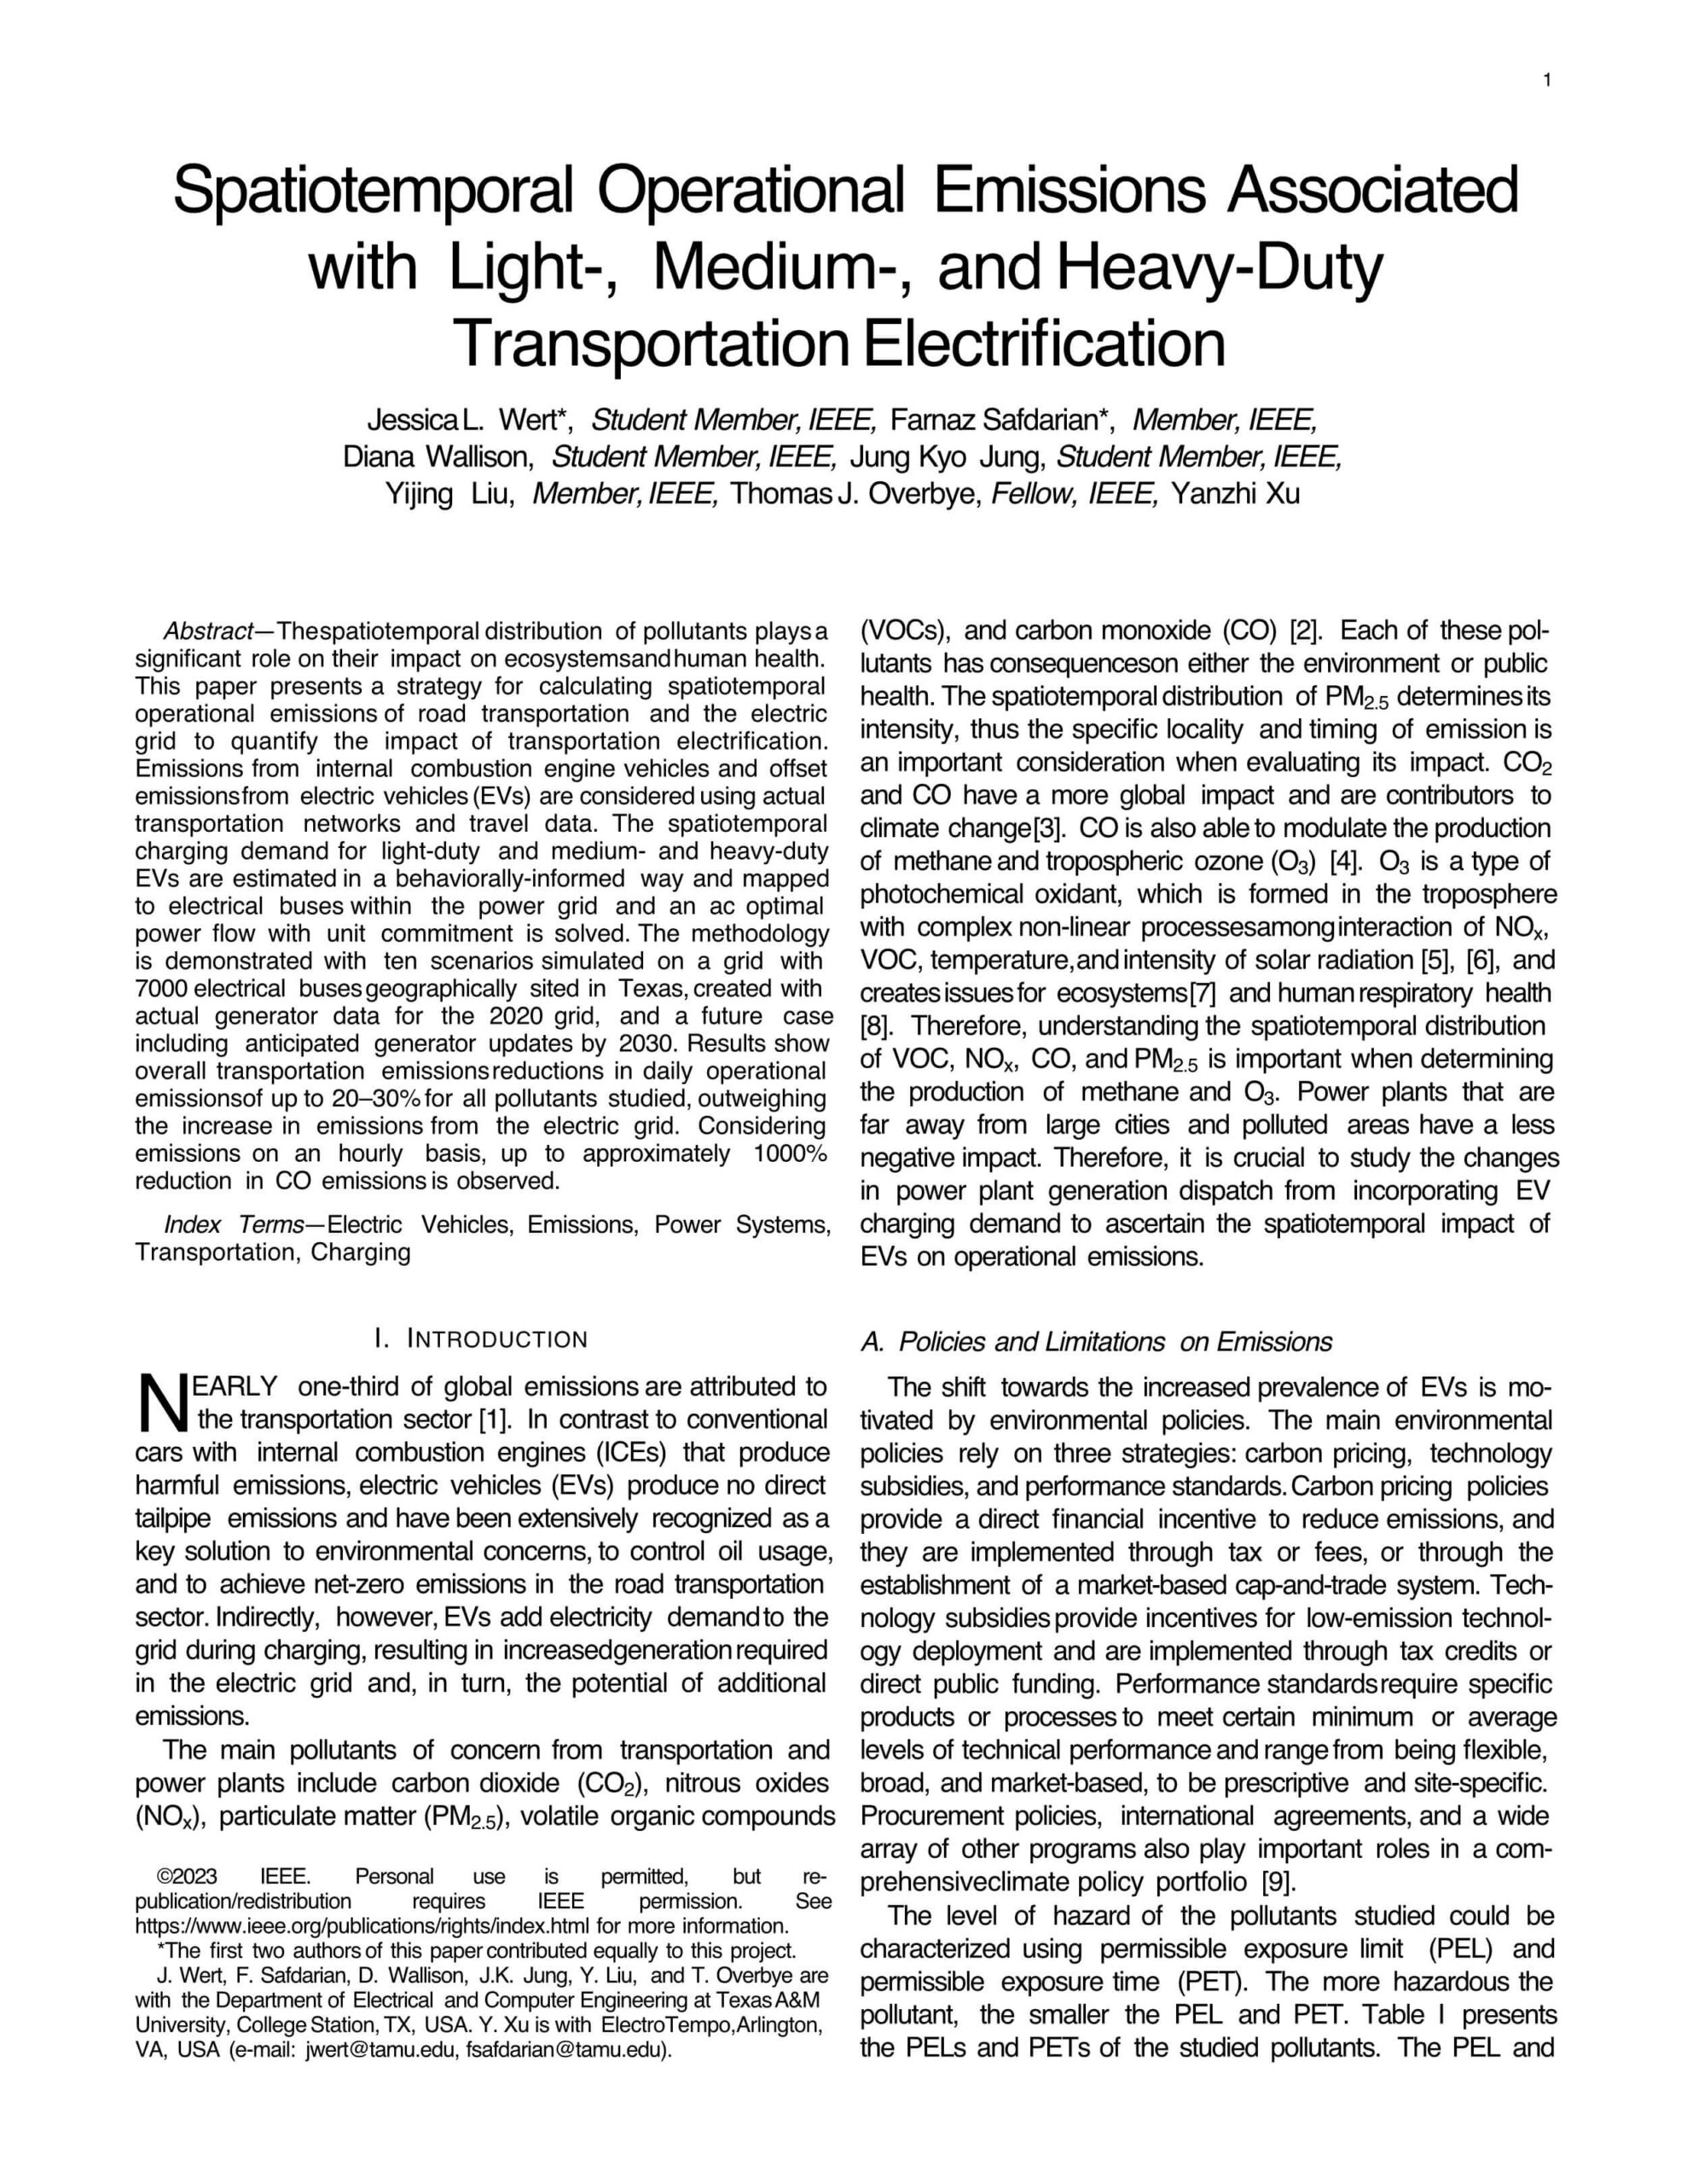 ElectroTempo | Paper | Spatiotemporal Operational Emissions Associated with Light-, Medium-, and Heavy-Duty Transportation Electrification